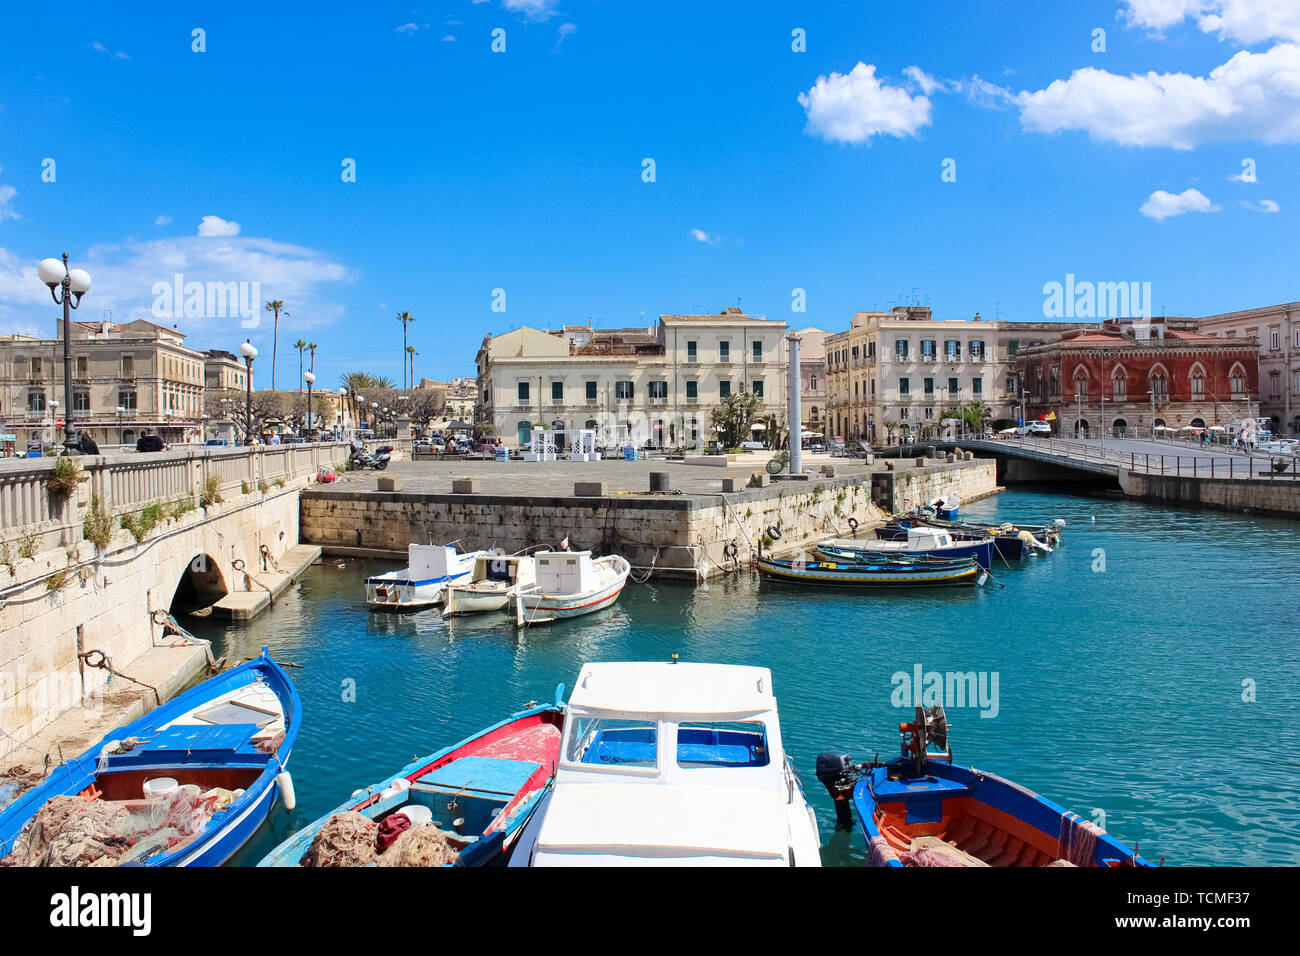 Syracuse, Sicily, Italy - Apr 10th 2019: Amazing view of the harbor and bridge connecting the city of Syracuse with famous Ortigia Island. Part of UNESCO World Heritage. Popular tourist spot. Stock Photo